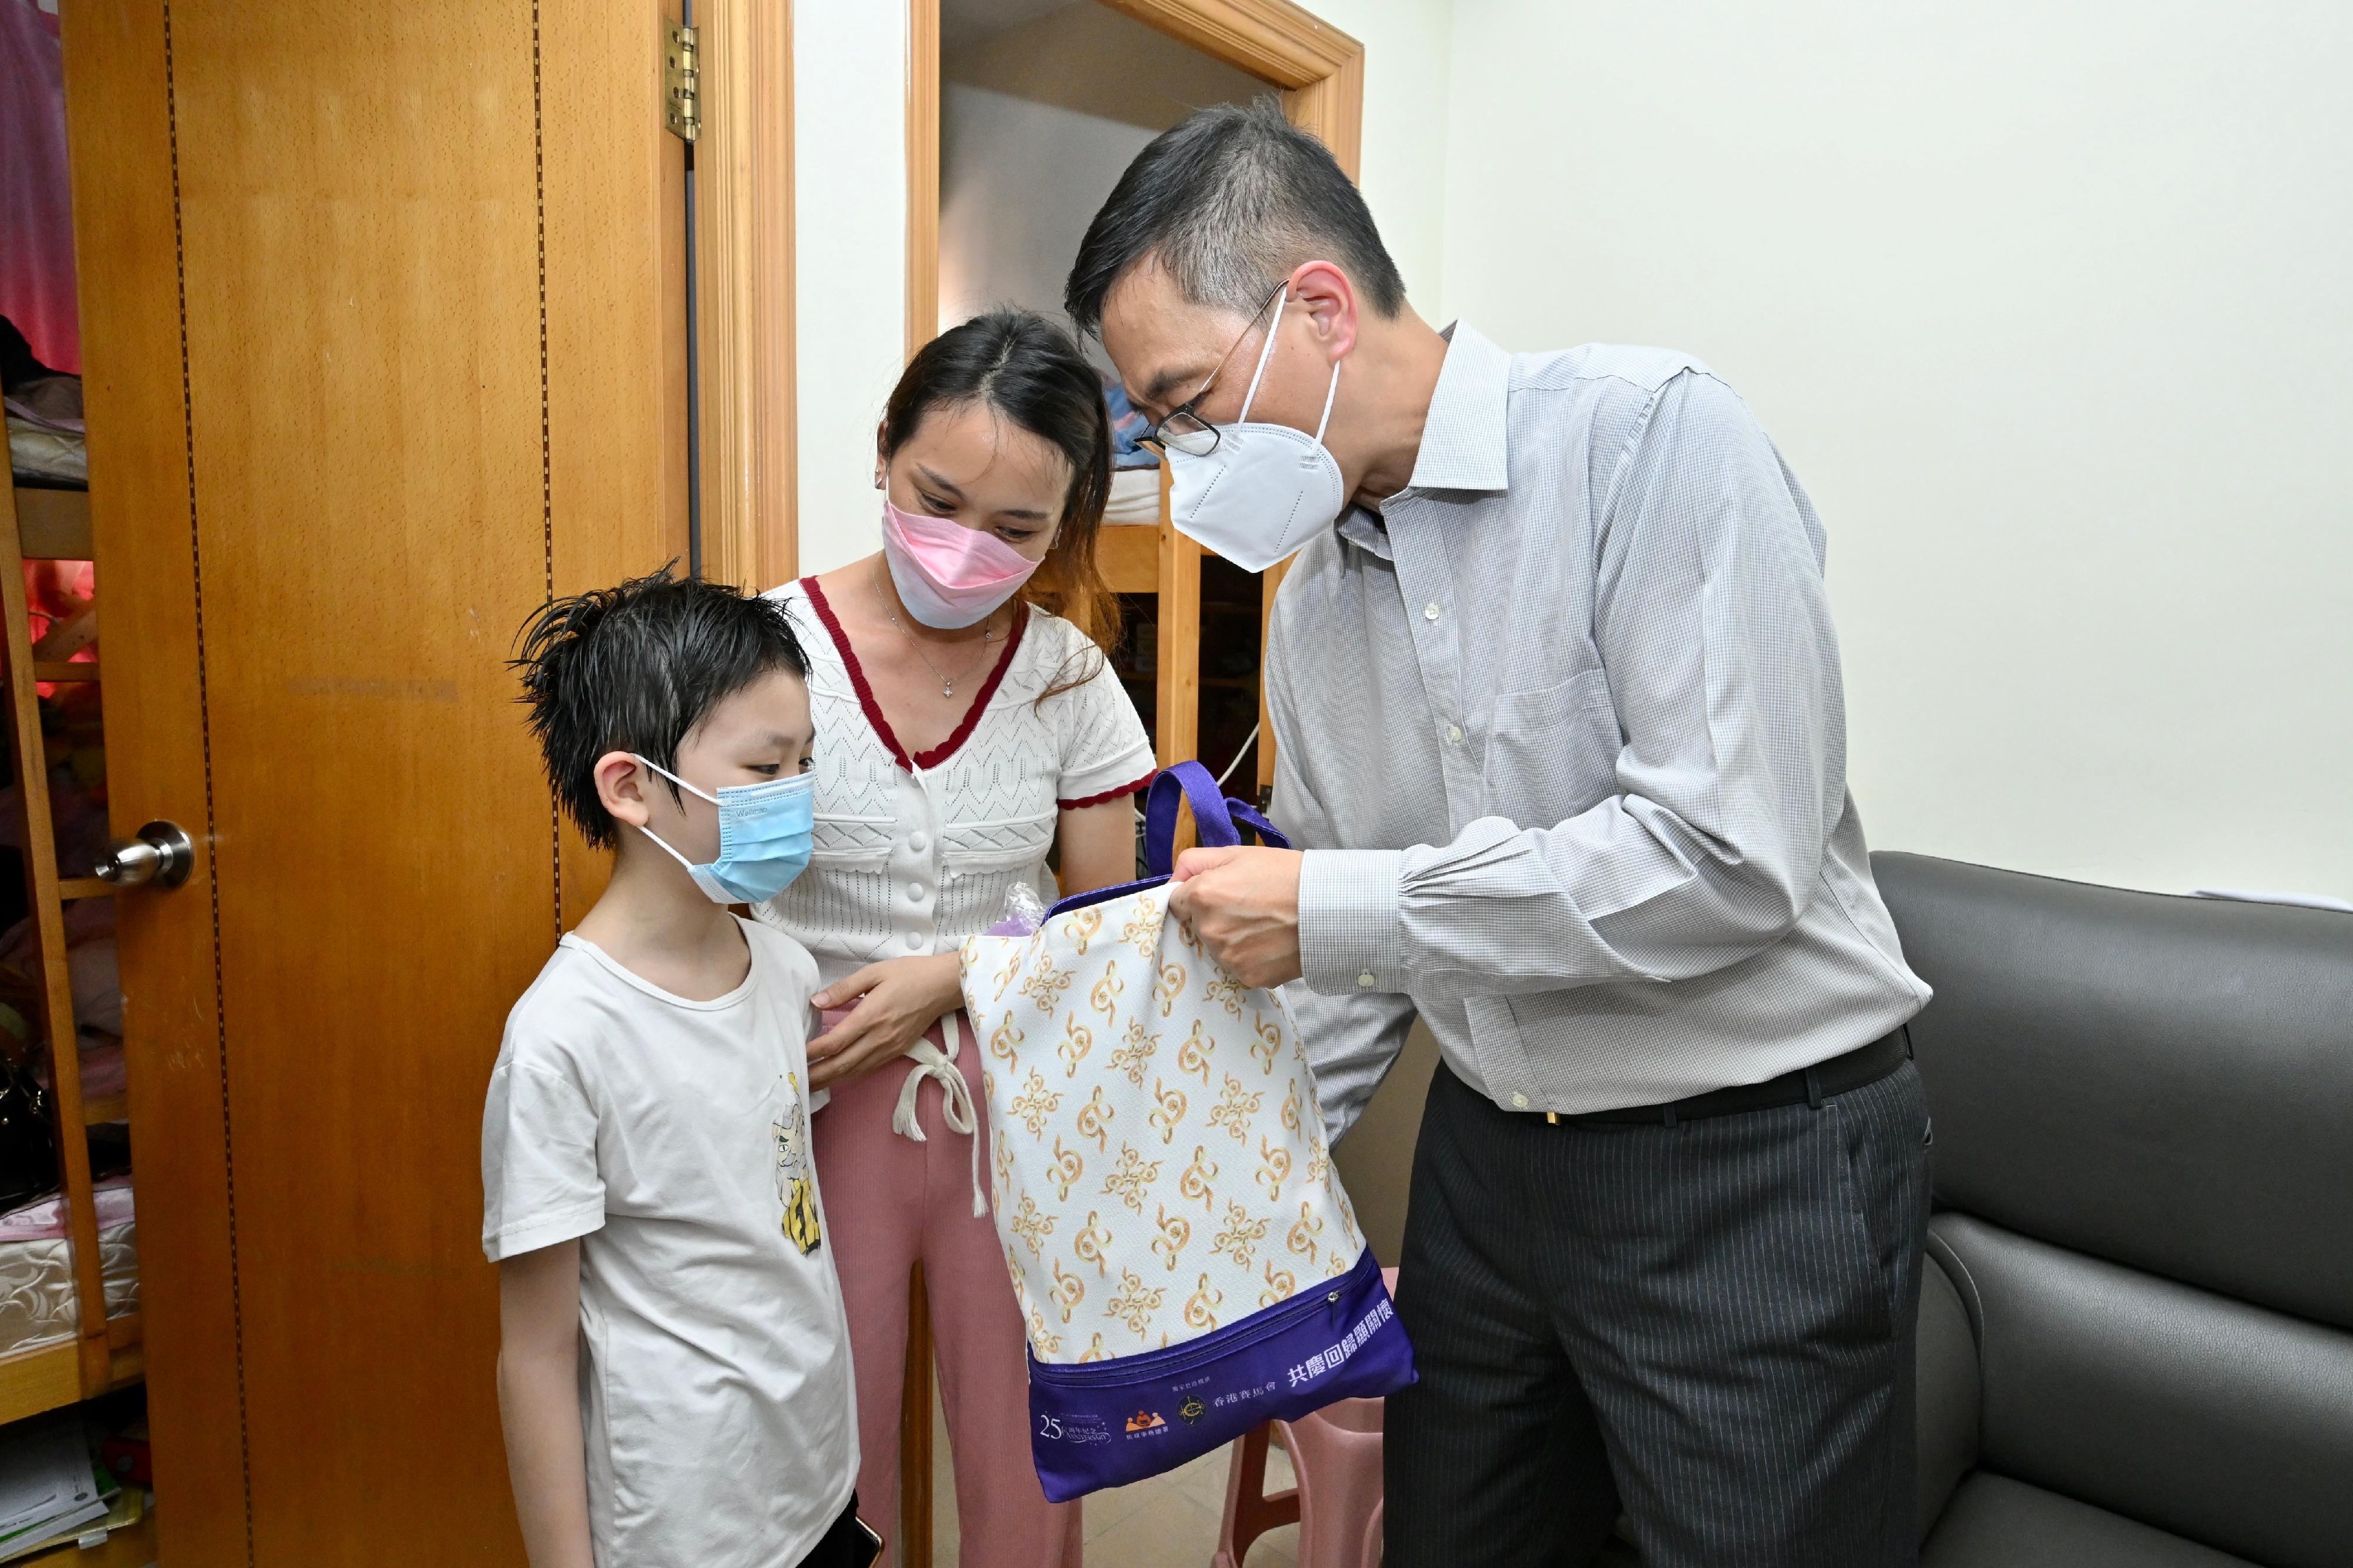 The Secretary for Education, Mr Kevin Yeung, paid home visits in Kowloon City District today (June 17) as part of the Celebrations for All project to celebrate the 25th anniversary of the establishment of the Hong Kong Special Administrative Region with local residents. Photo shows Mr Yeung (right) introducing a gift pack to a grass-roots family.